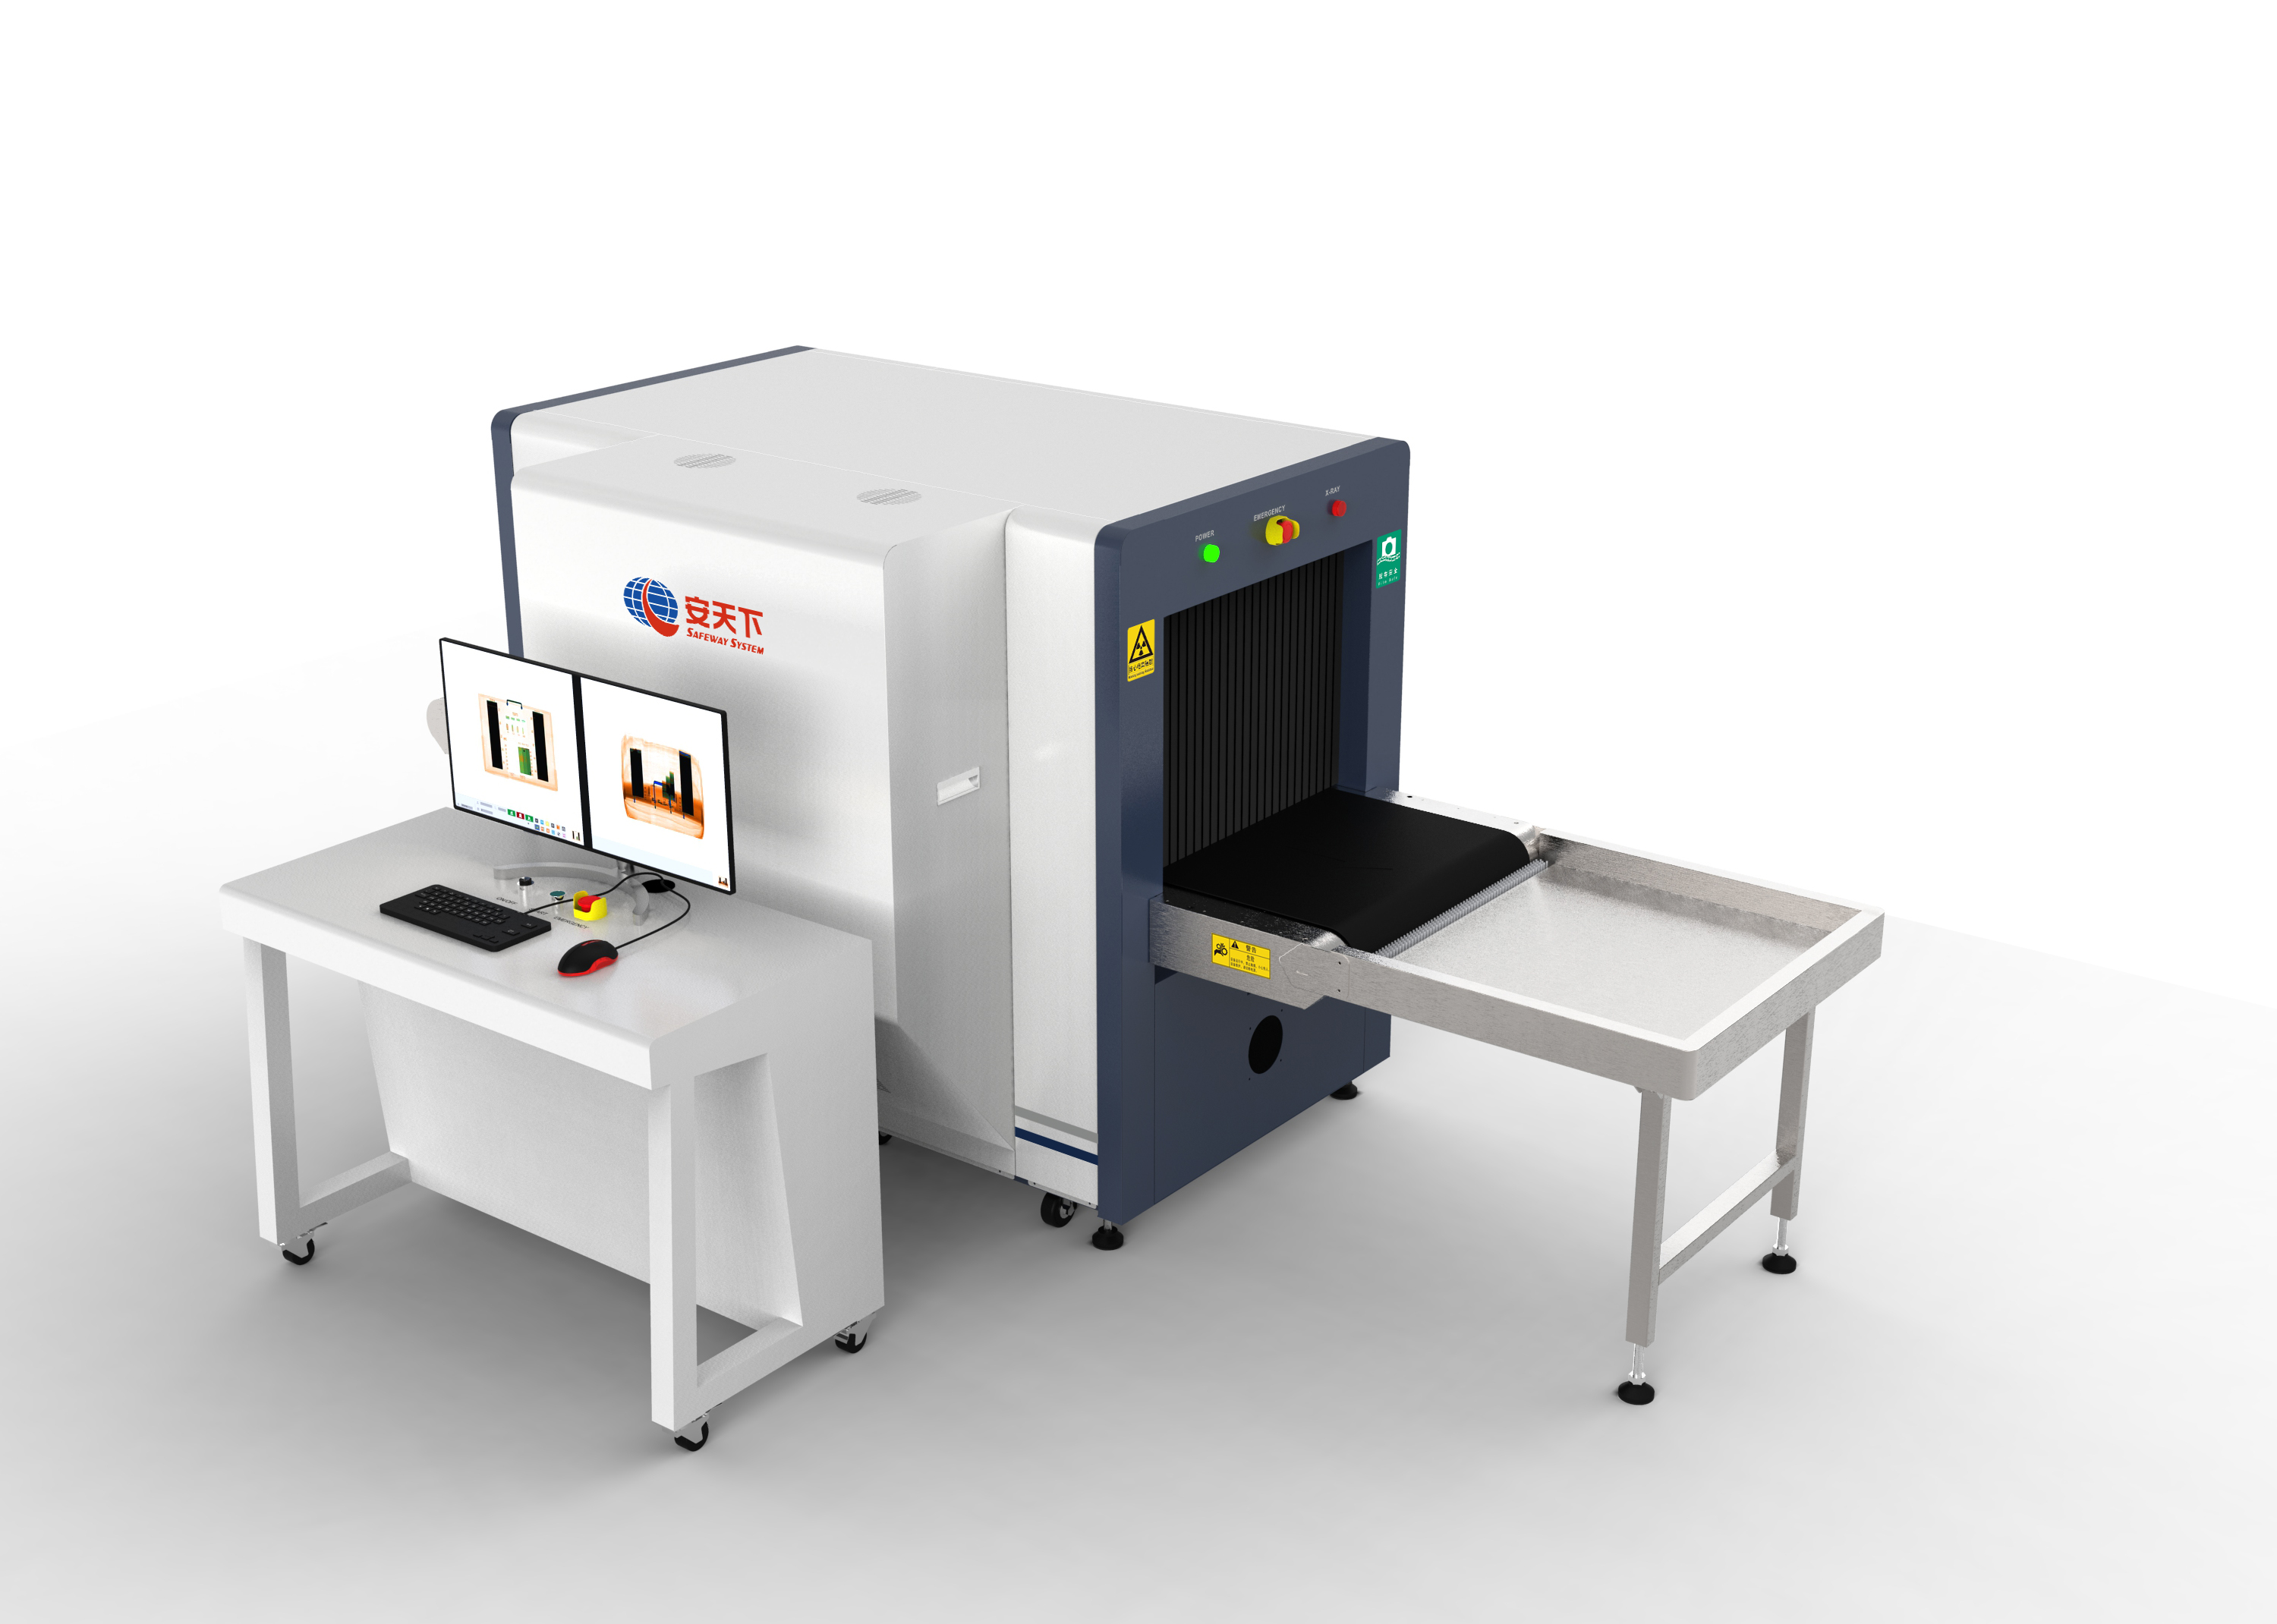 X-ray Metal Detector Screening Scanning Machine Airport Security Inspection Explosives with UK Detector Board